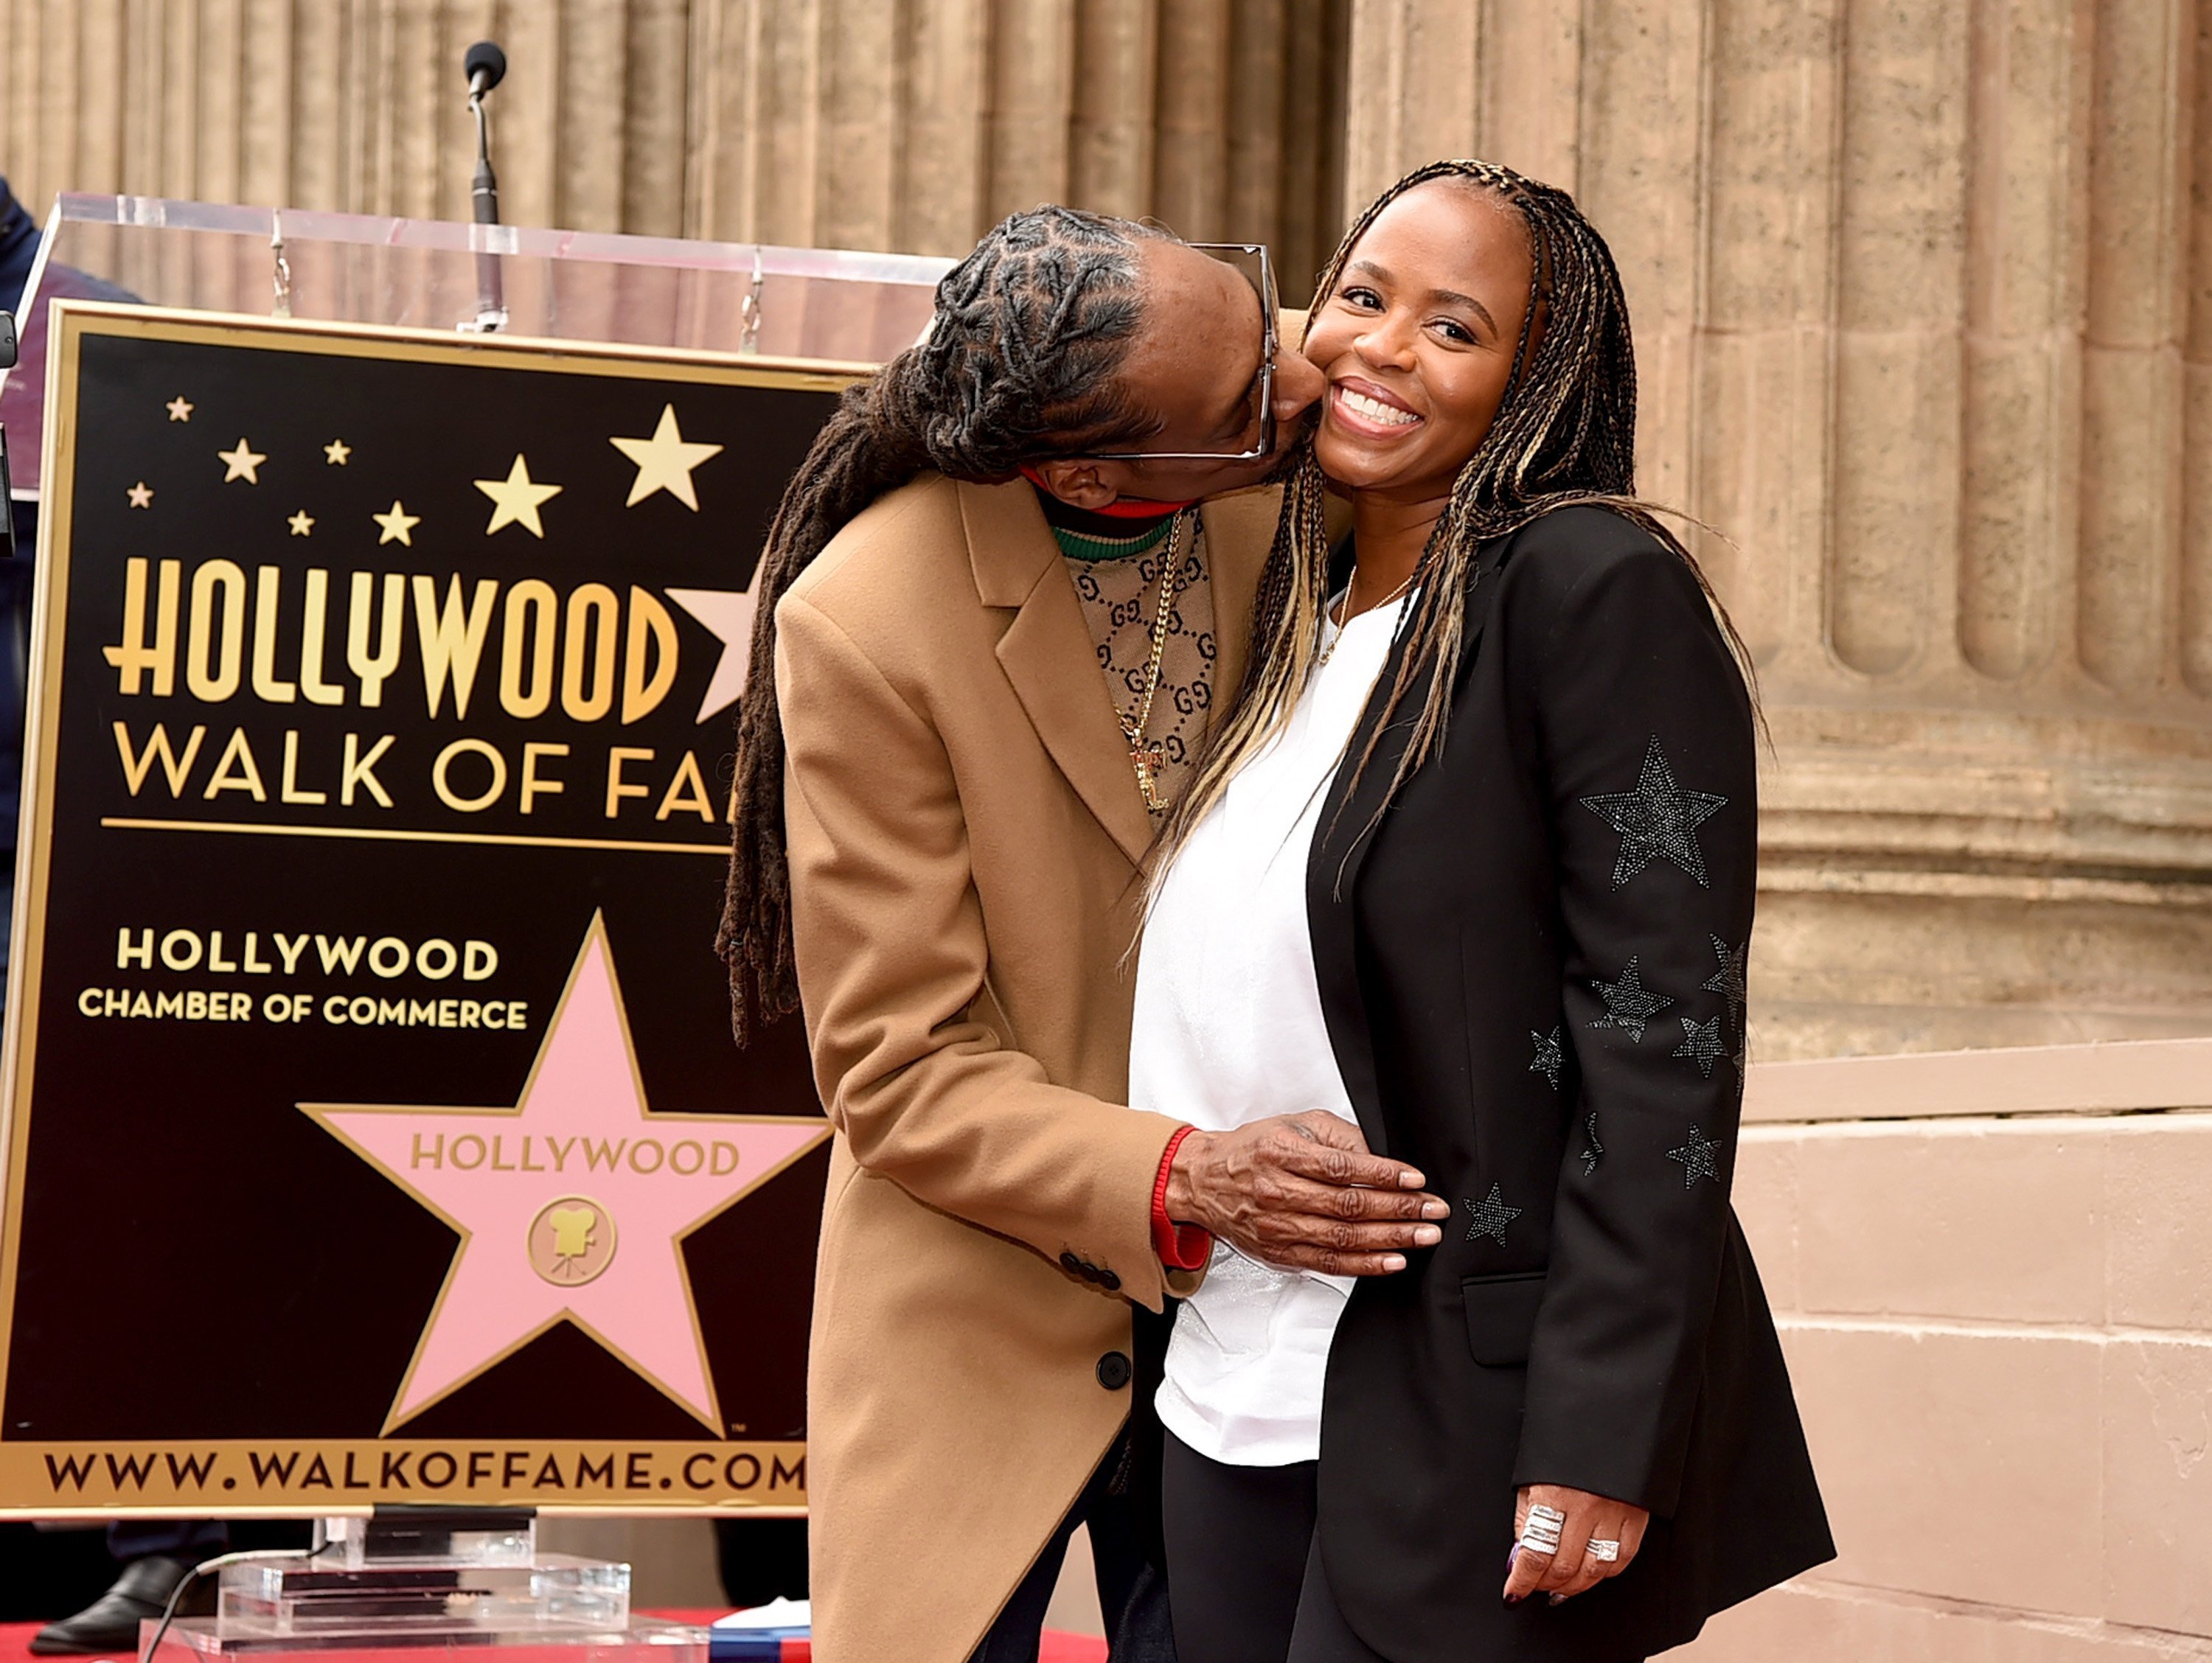 Snoop Dogg, with his wife Shante Broadus on The Hollywood Walk Of Fame on November 19, 2018. | Photo: Getty Images